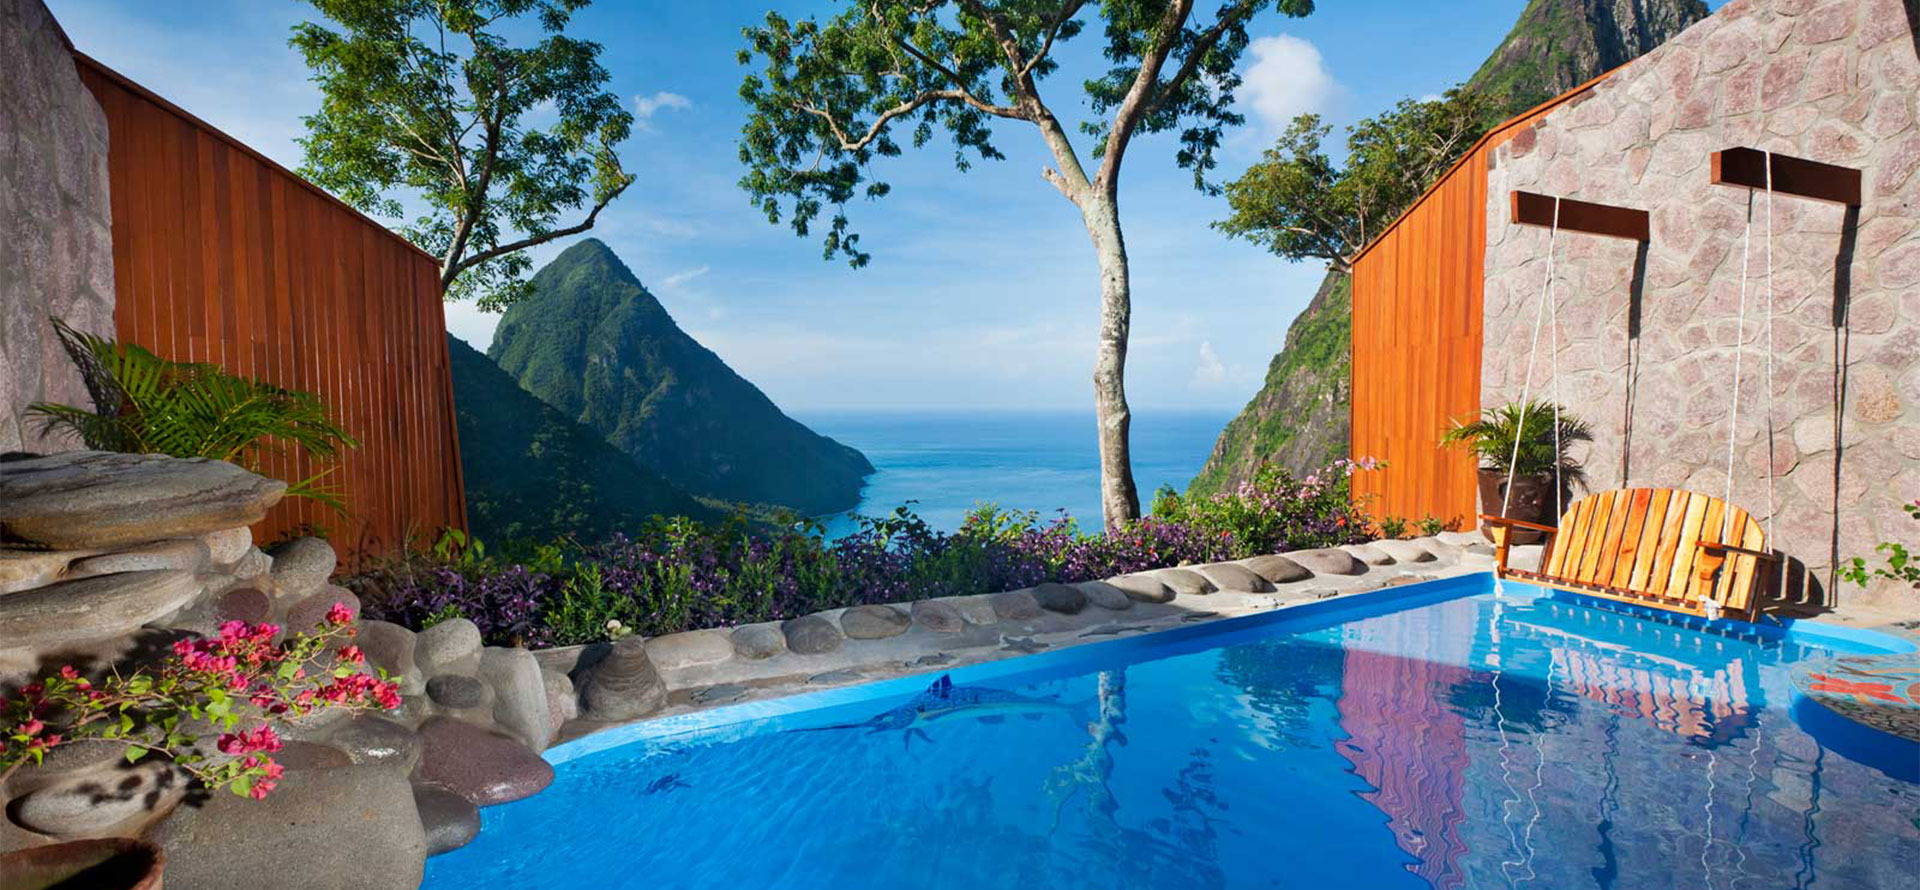 St. lucia all inclusive resort with amazing view.